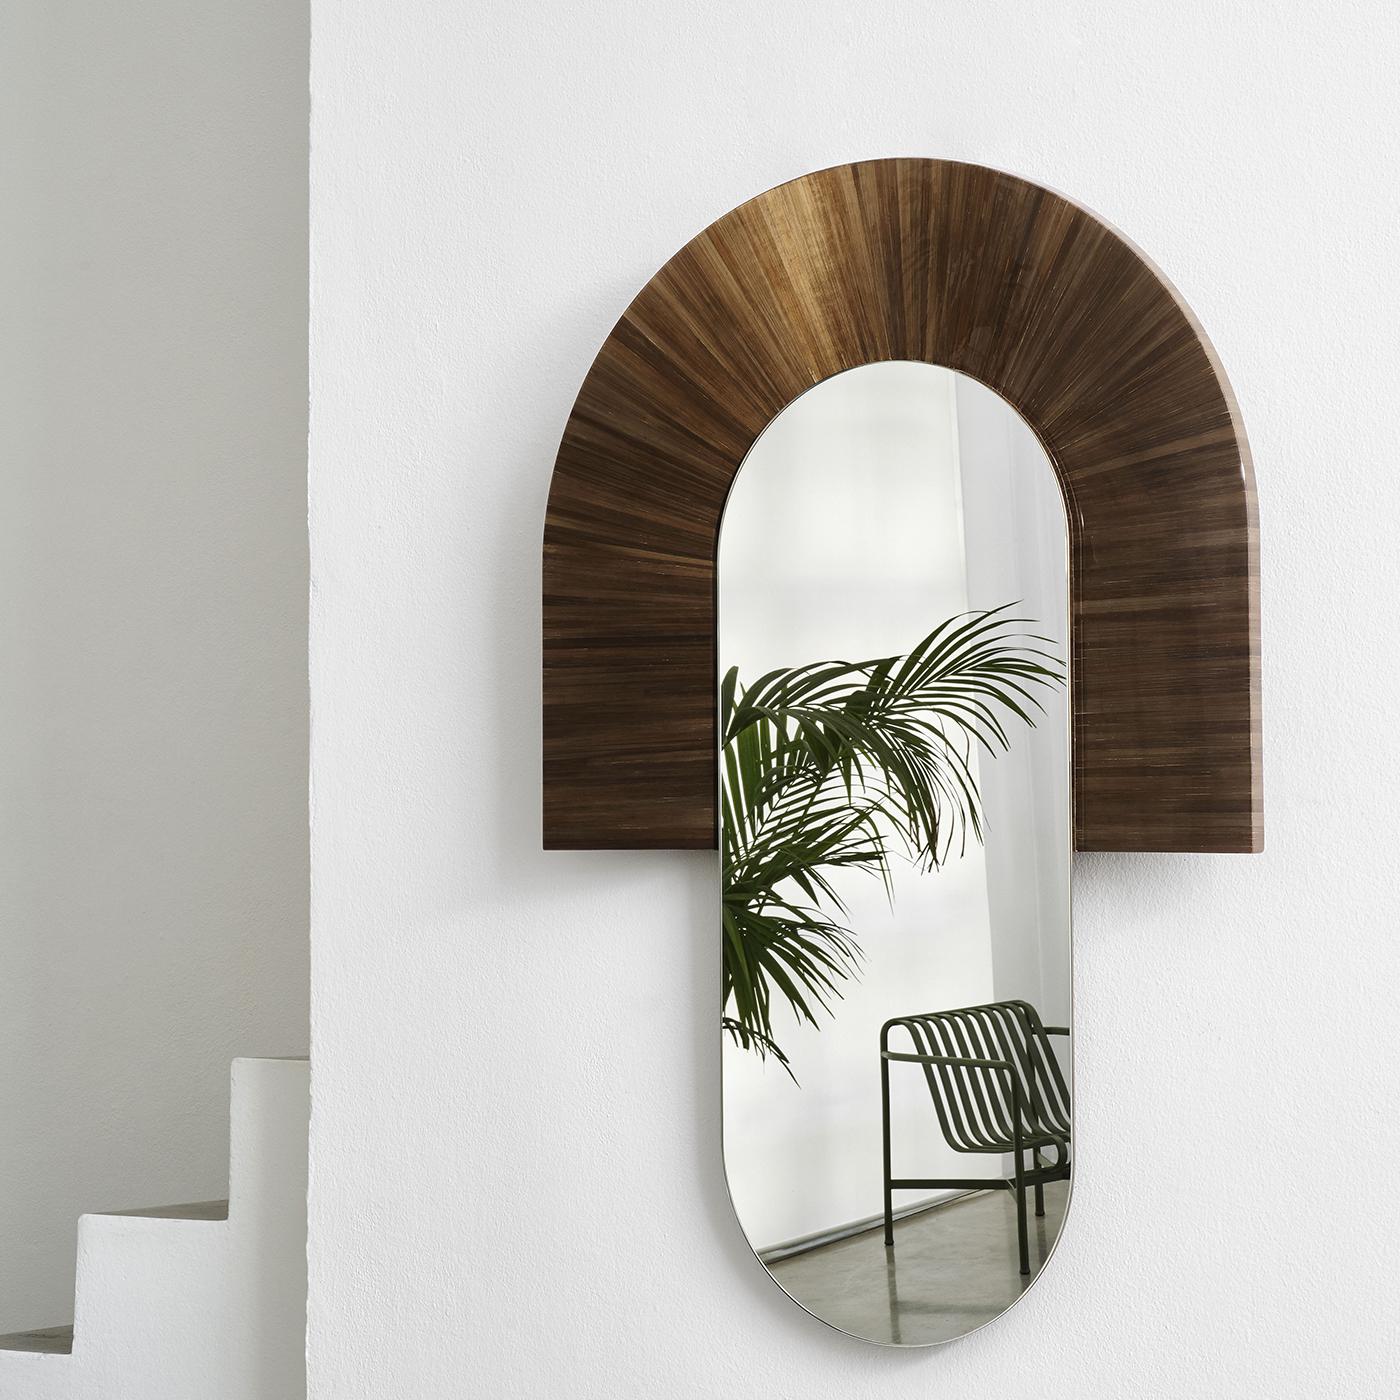 Reflect on your day in peace with the Santa Mirror by Marco Sorrentino. Framed in divine straw marquetry in glistening dark gold tones, the oval mirror can also help brighten up a dark hallway or corner. The mirror is available in pink, gray and